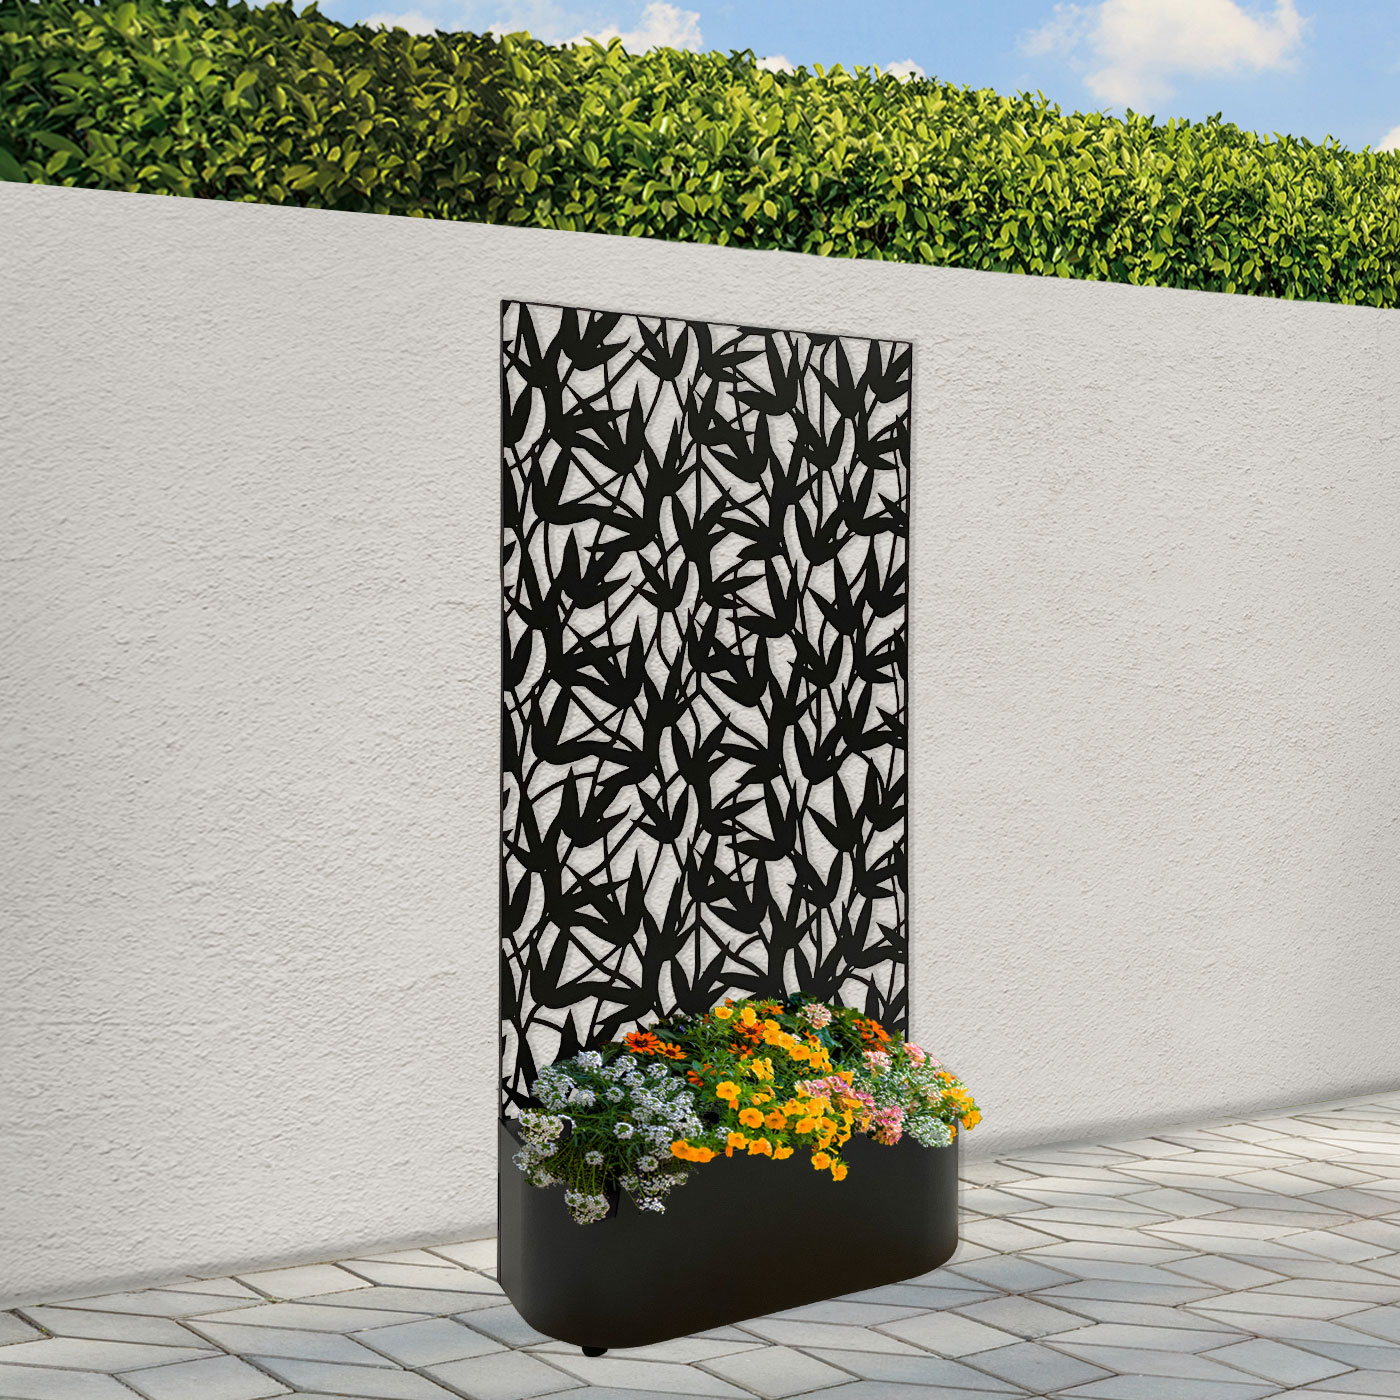 'Bamboo' Garden Screen with Rounded Front Planter  